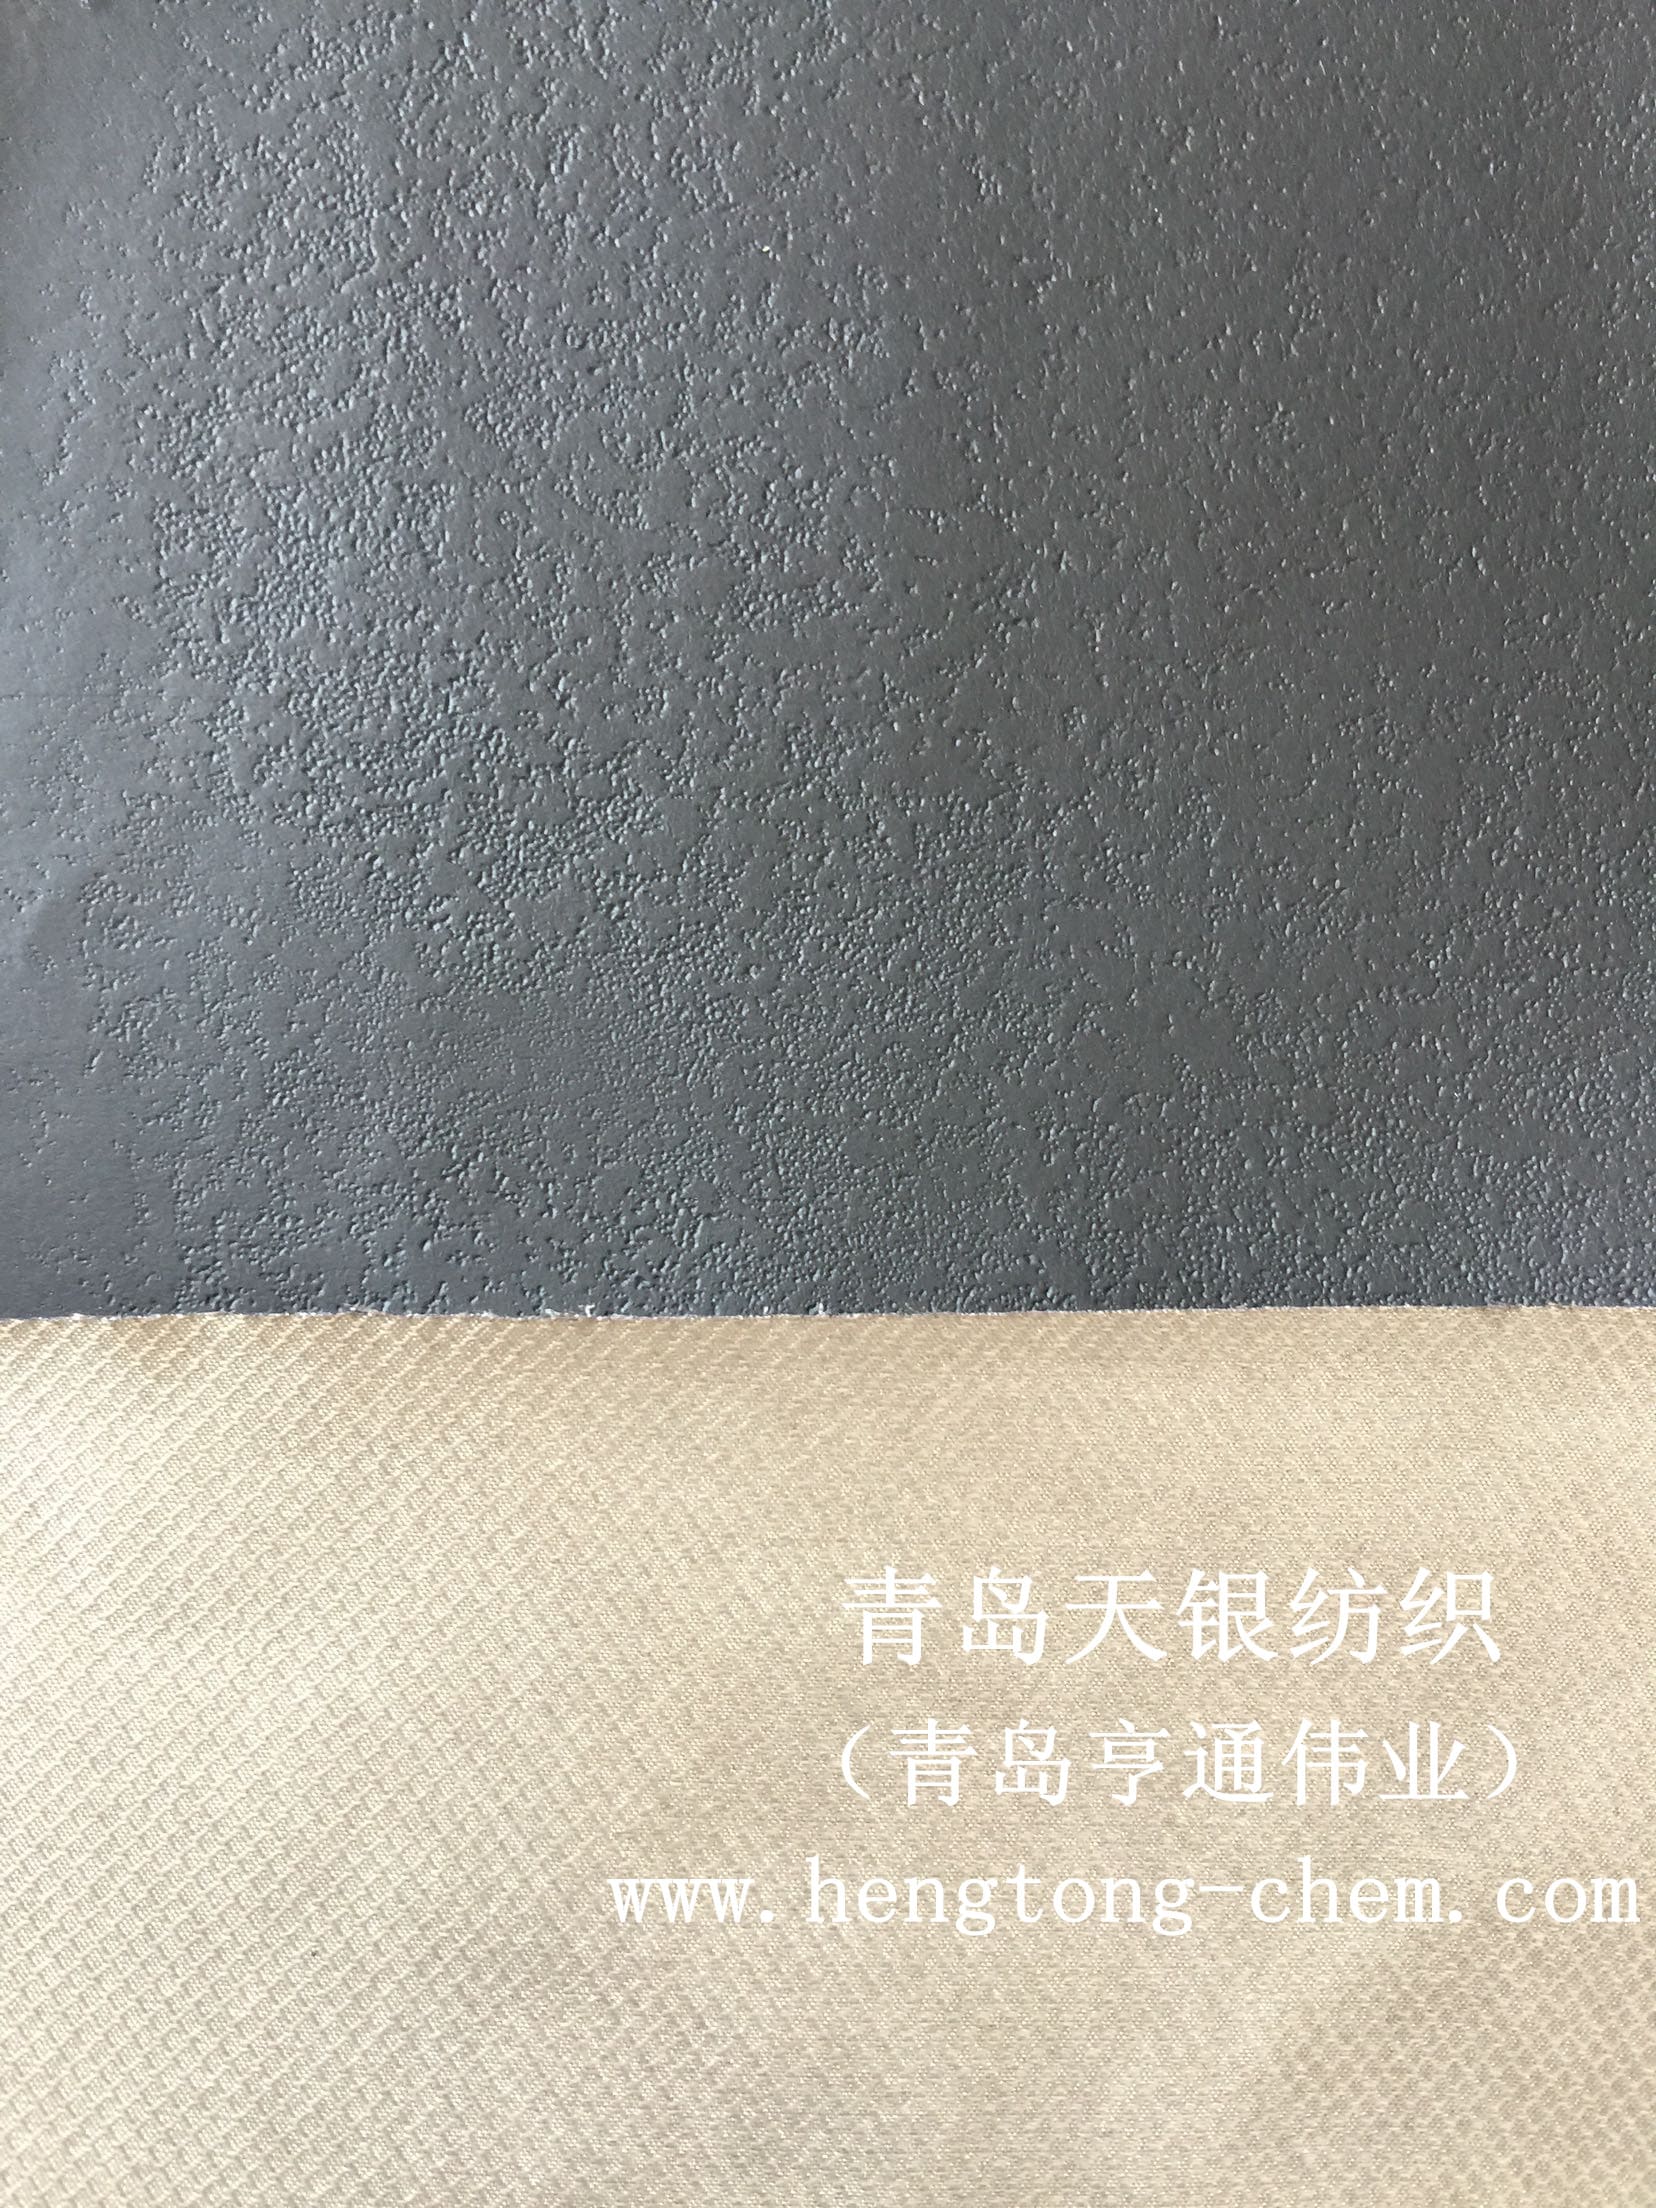 Fabric coated with rare earth elements